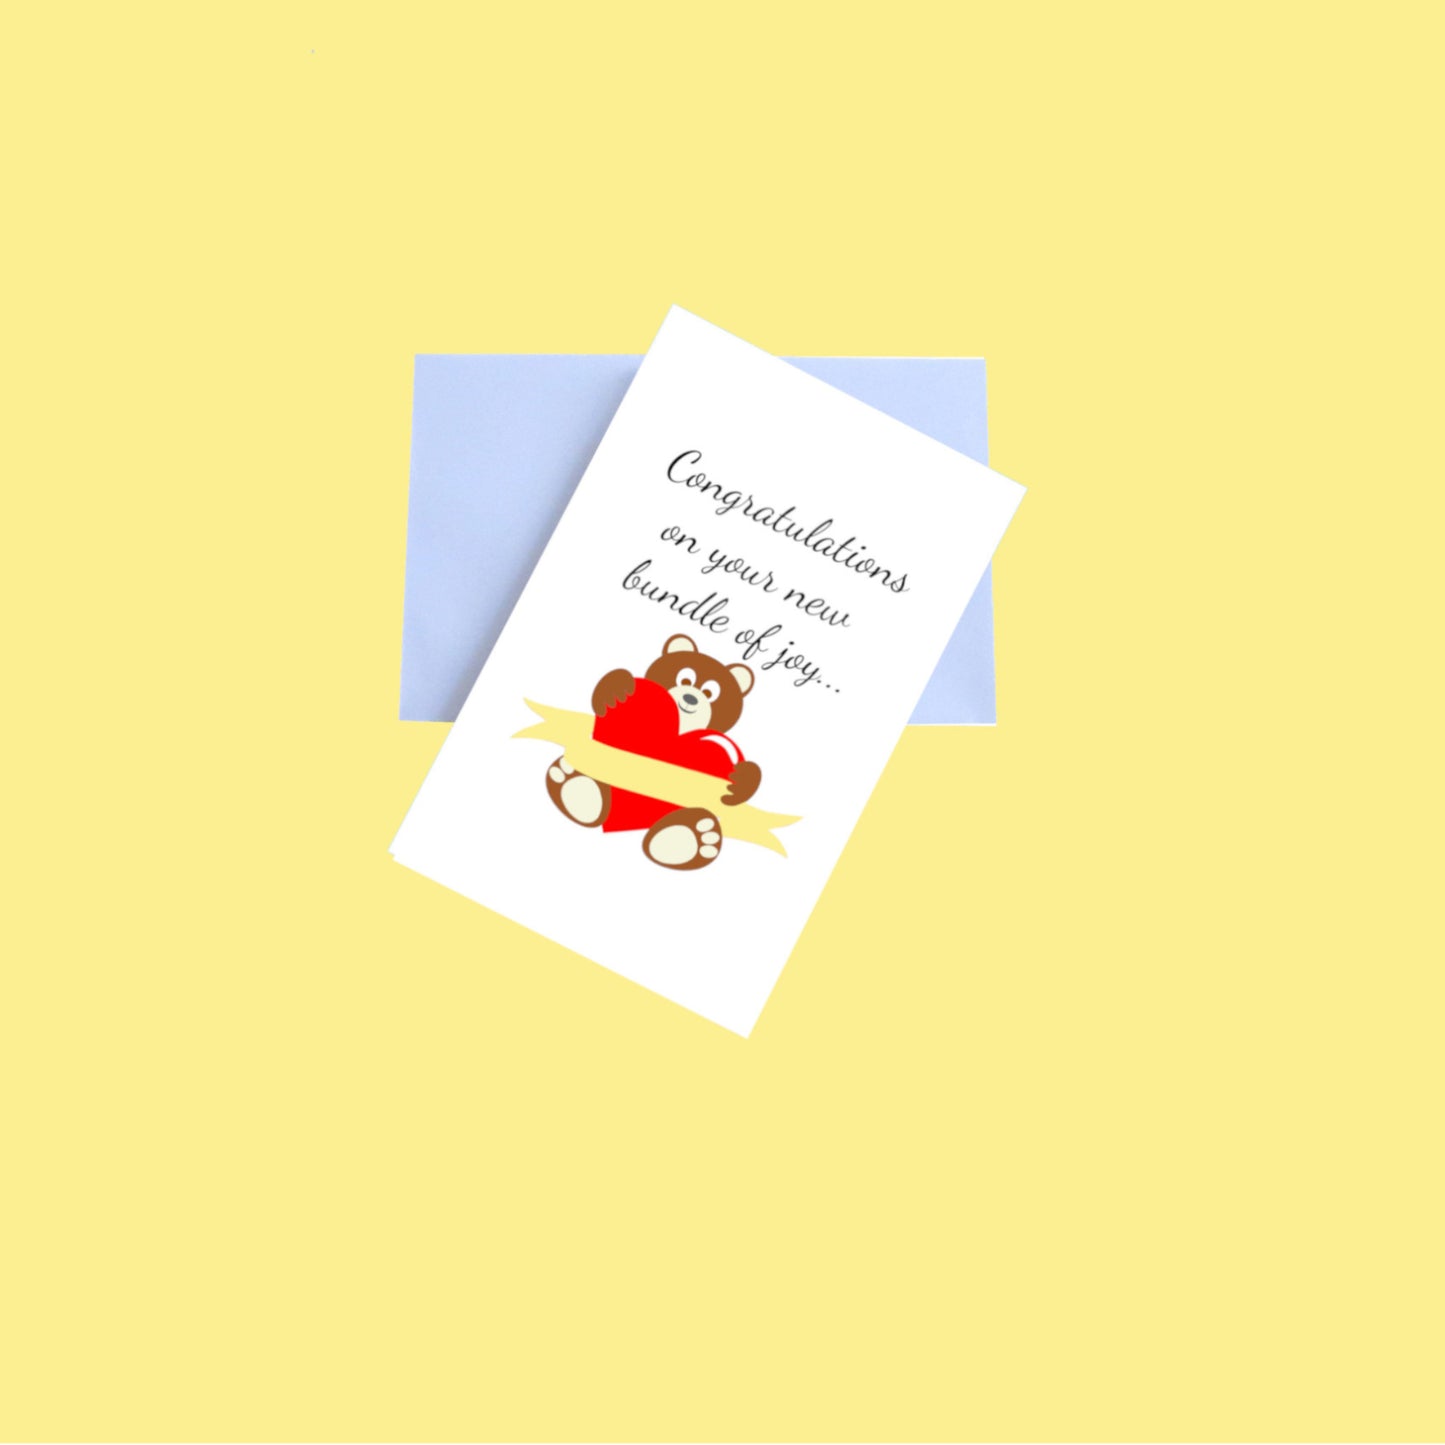 Congratulations on new 5.5x8.5 Greeting Card and Envelope - Yellow